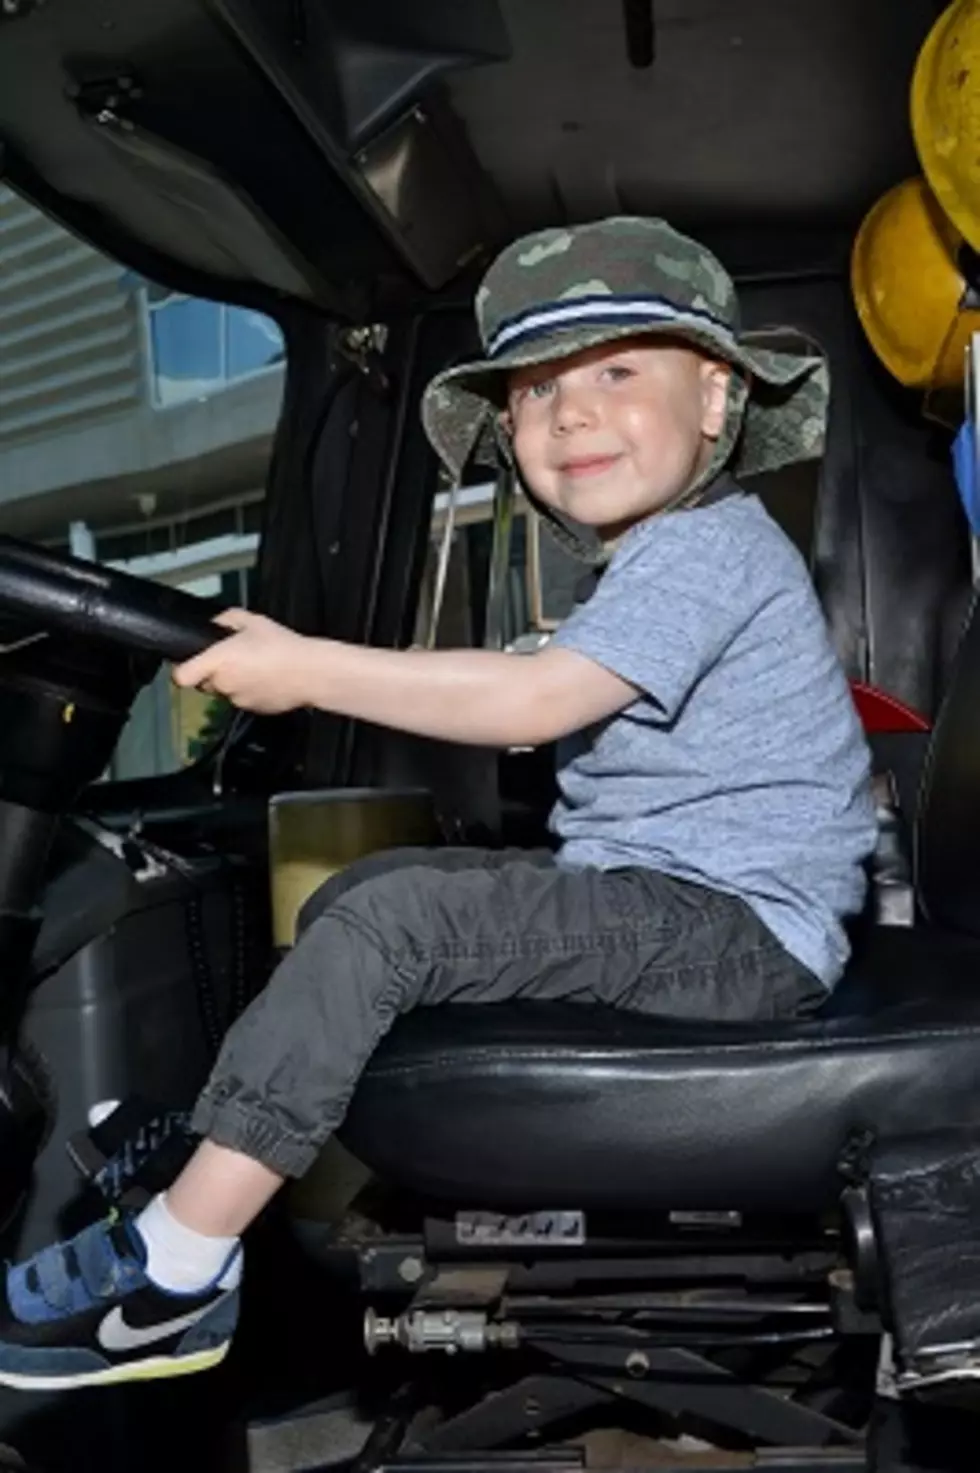 &#8220;Touch-a-Truck&#8221; Event At Tanger Outlet This Weekend